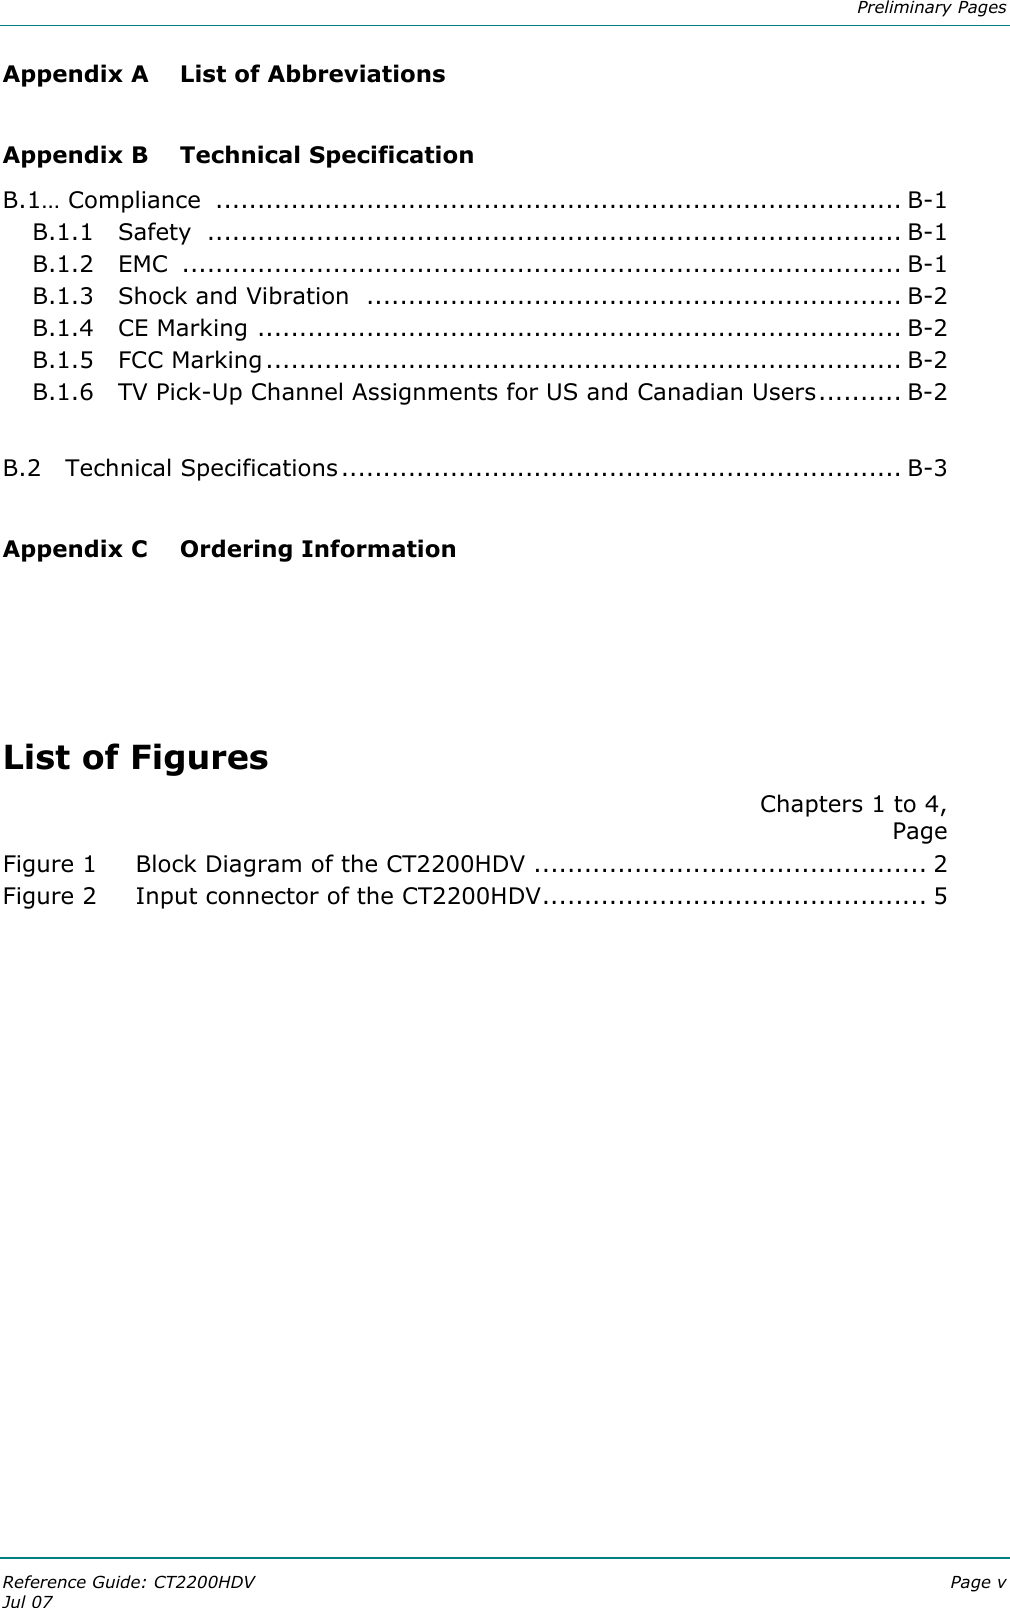  Preliminary Pages Reference Guide: CT2200HDV  Page v Jul 07 Appendix A  List of Abbreviations  Appendix B  Technical Specification B.1… Compliance  .................................................................................. B-1 B.1.1   Safety  ................................................................................... B-1 B.1.2   EMC  ...................................................................................... B-1 B.1.3   Shock and Vibration  ................................................................ B-2 B.1.4   CE Marking ............................................................................. B-2 B.1.5   FCC Marking............................................................................ B-2 B.1.6   TV Pick-Up Channel Assignments for US and Canadian Users.......... B-2  B.2   Technical Specifications................................................................... B-3  Appendix C  Ordering Information     List of Figures Chapters 1 to 4,  Page Figure 1 Block Diagram of the CT2200HDV ............................................... 2 Figure 2 Input connector of the CT2200HDV.............................................. 5    